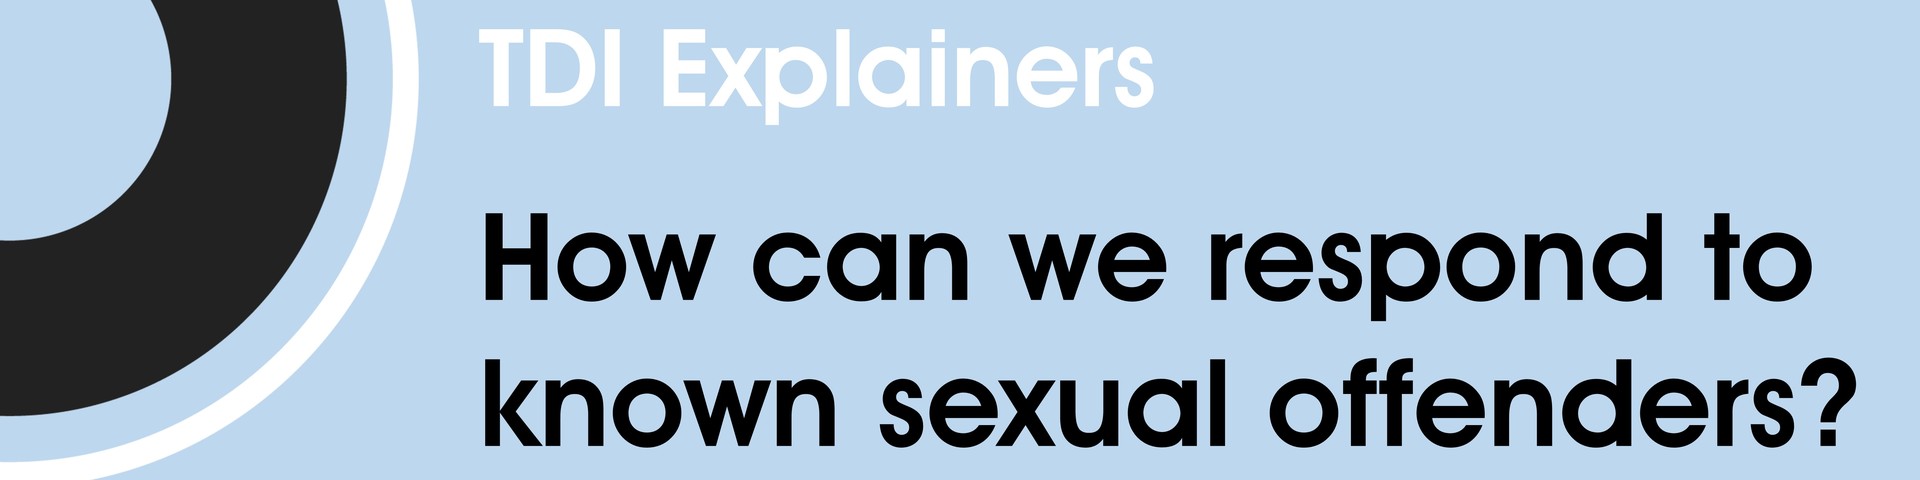 How can we respond to known sexual offenders?